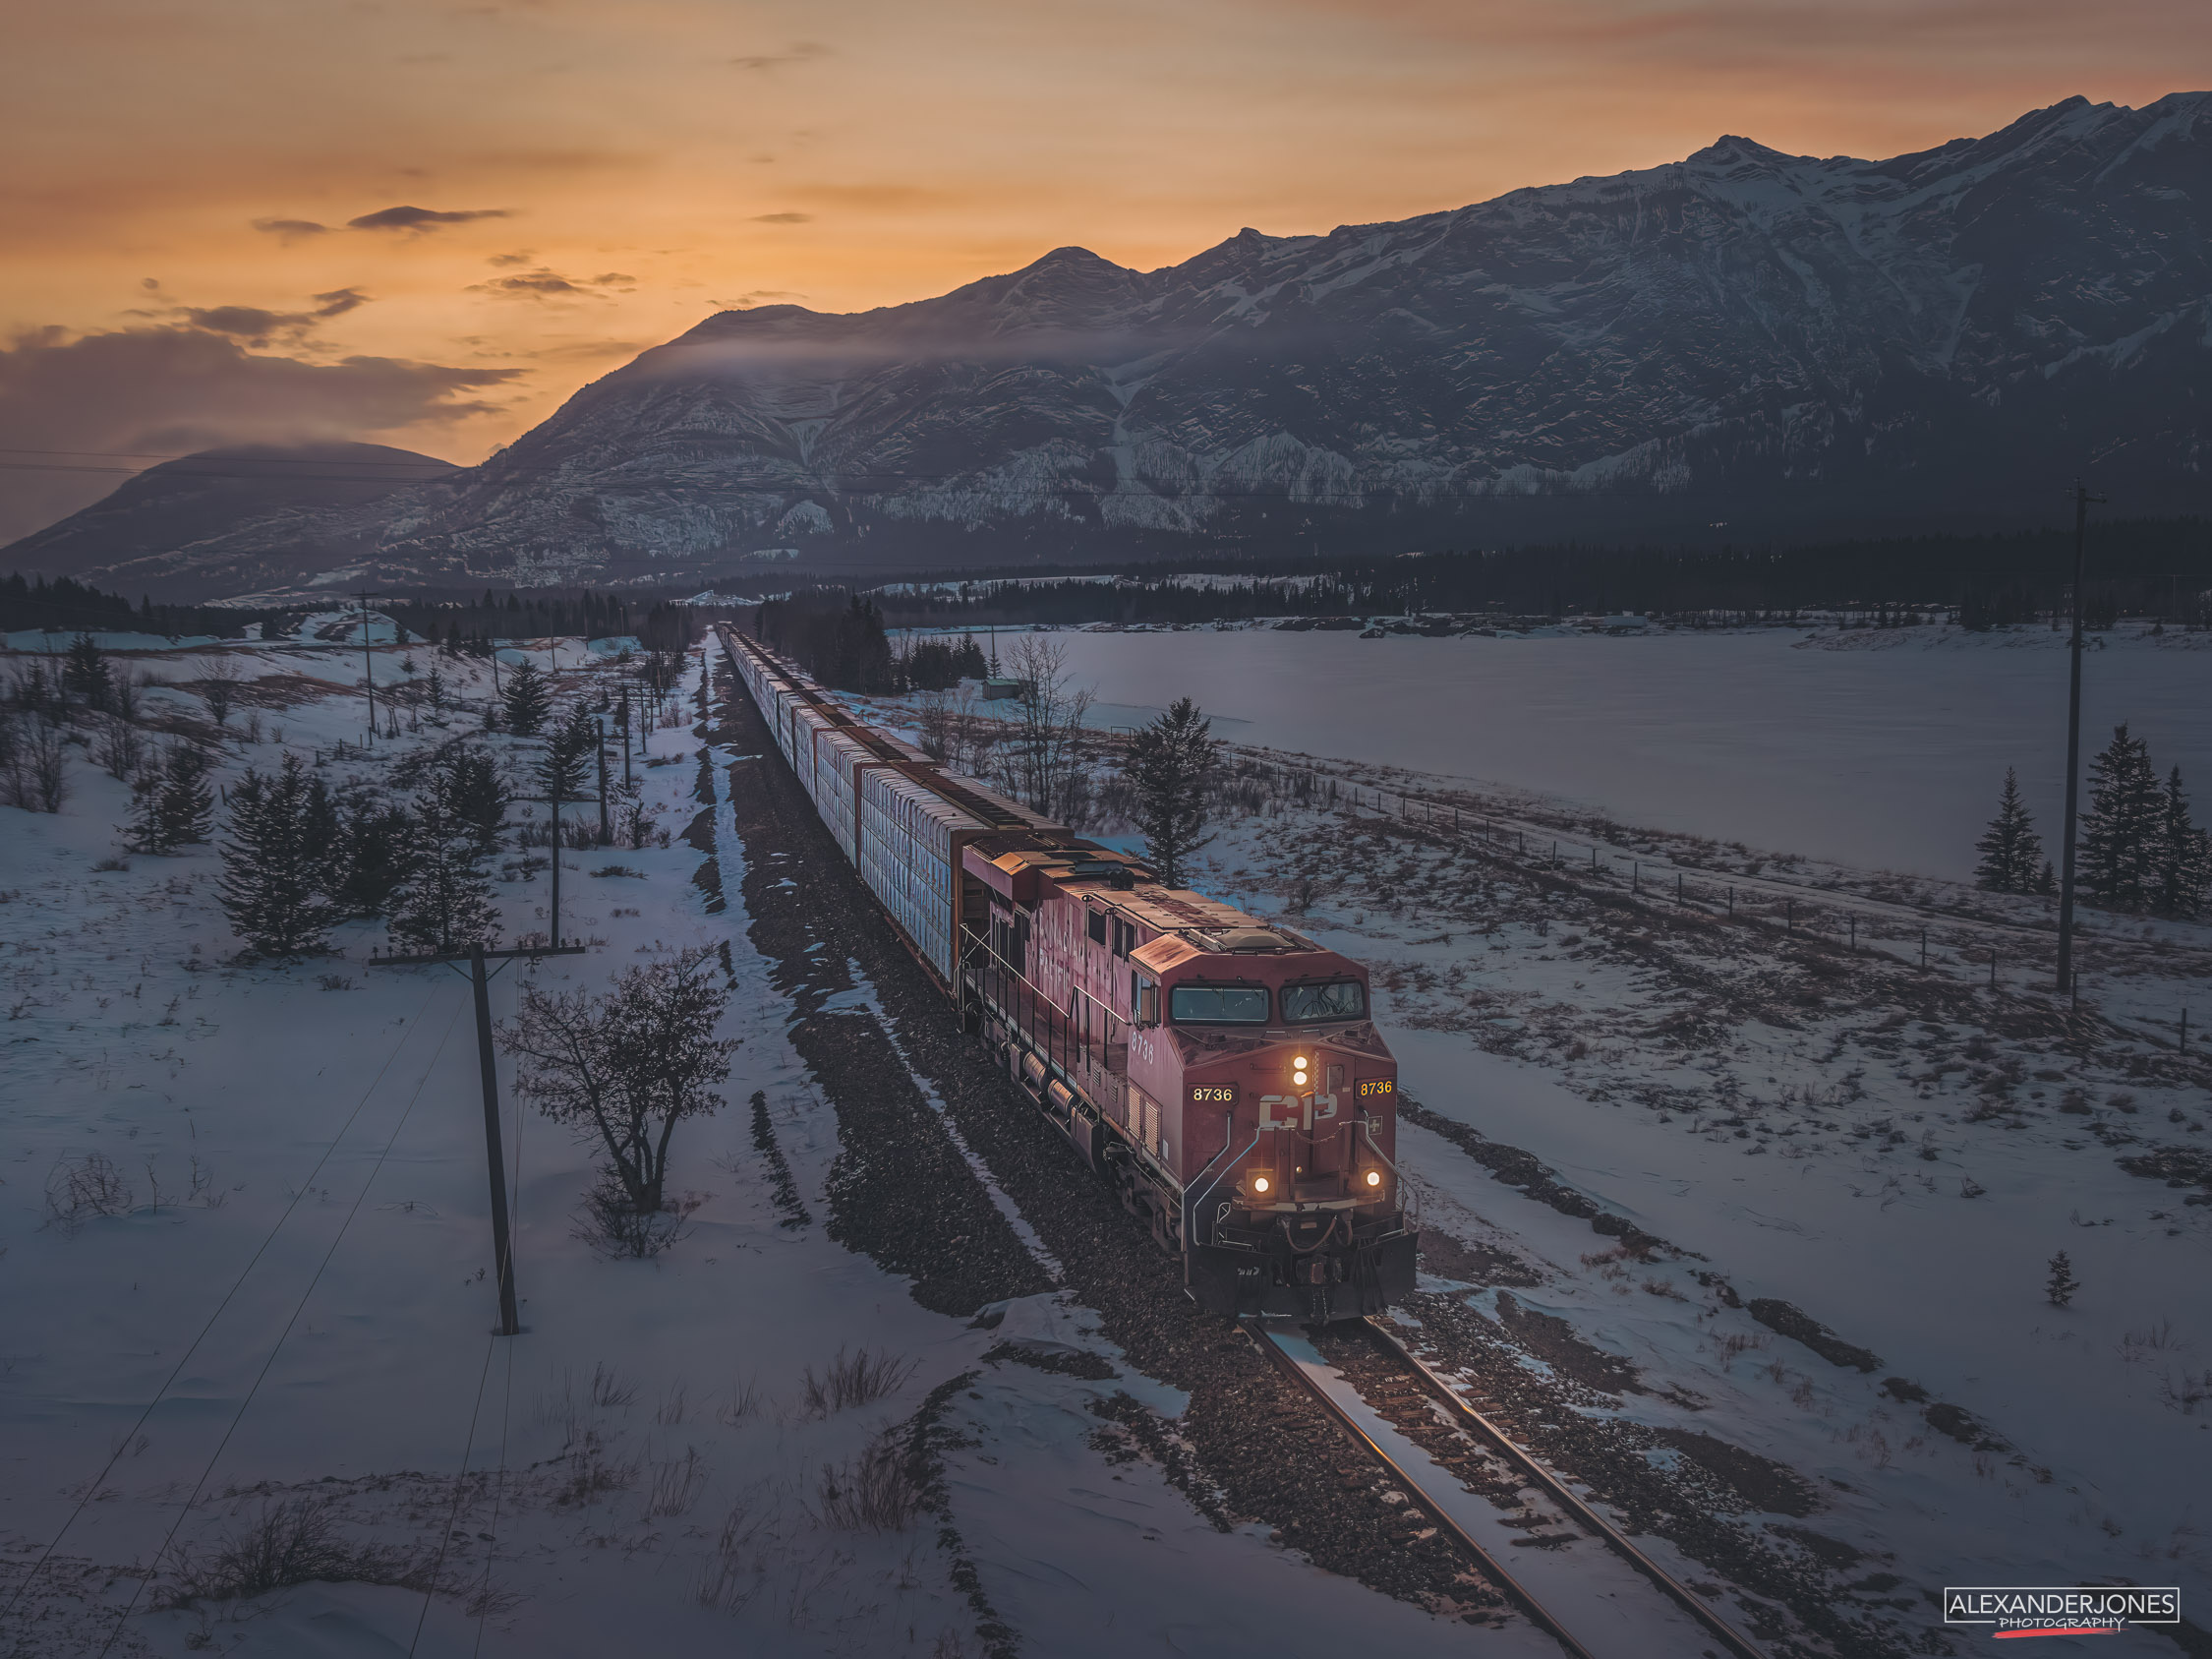 train photographed during dusk set against snow capped mountains